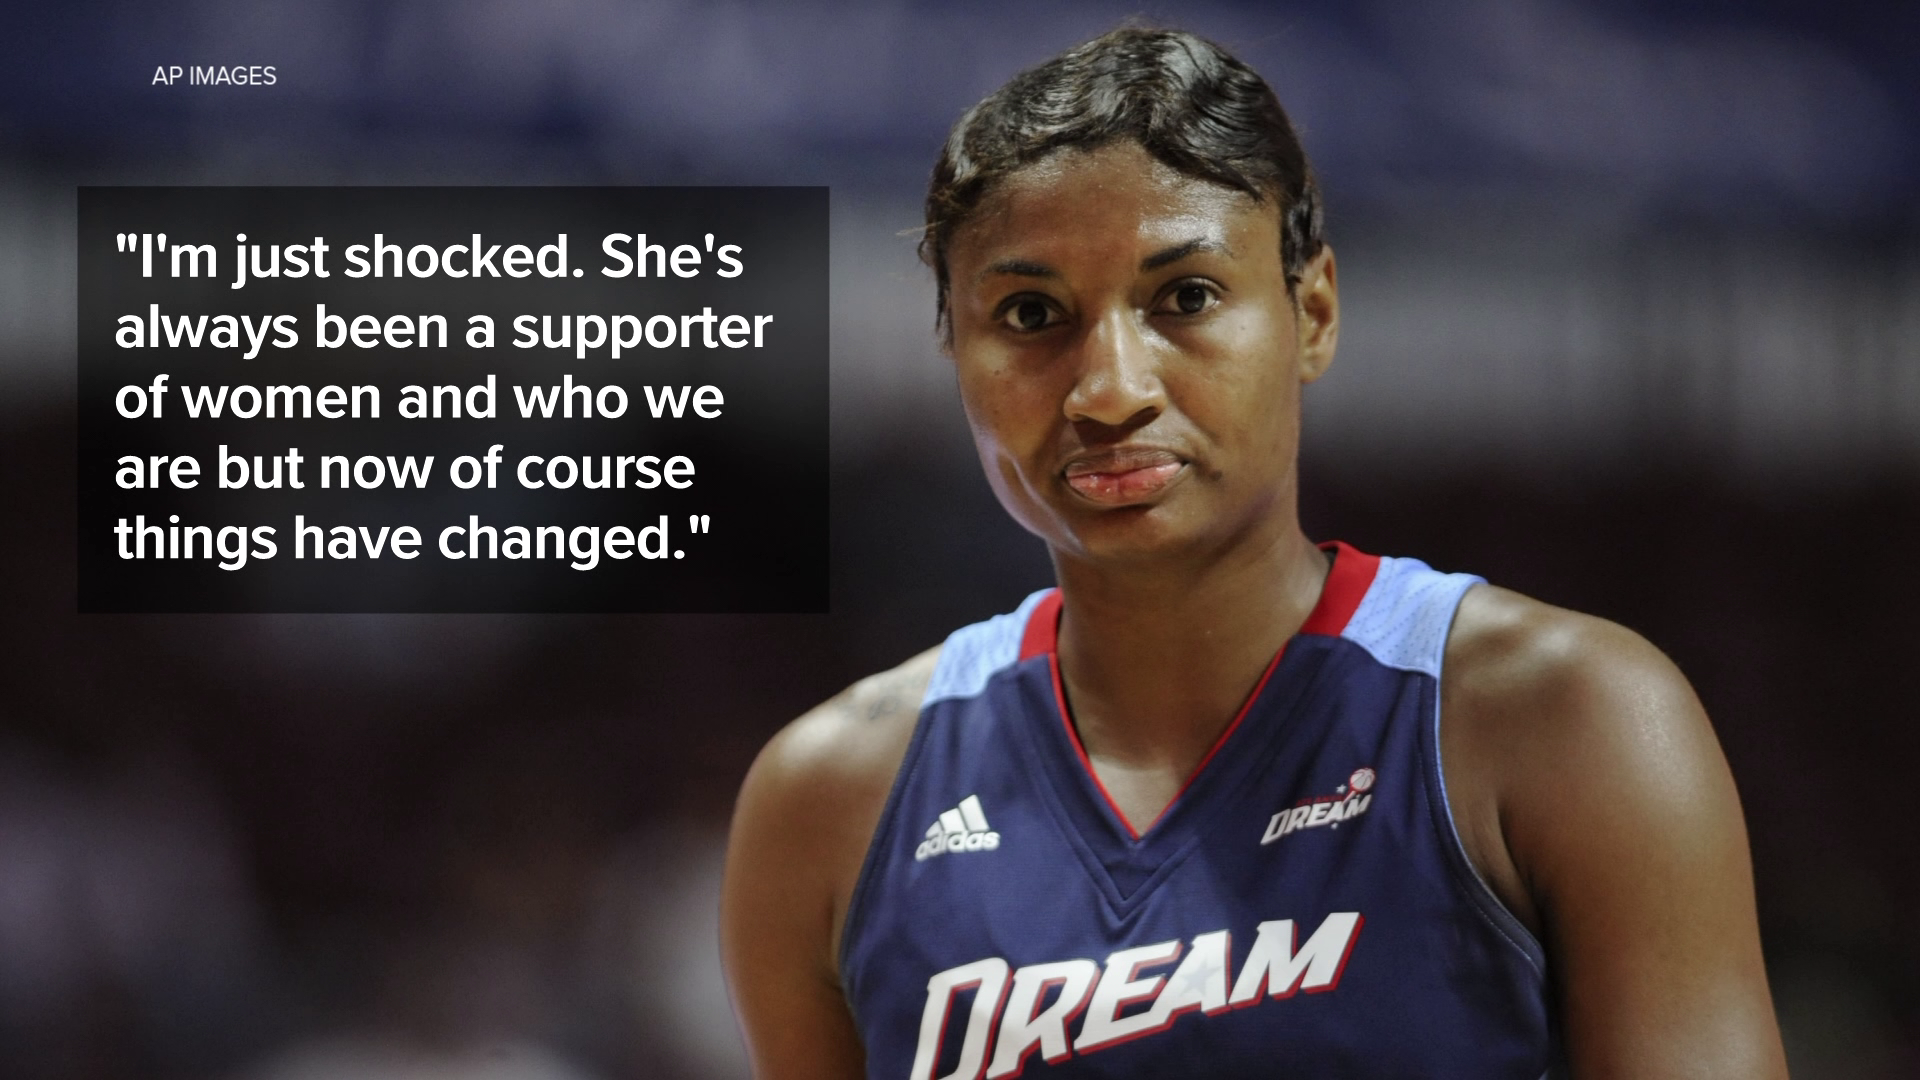 The WNBA announced the league's 2020 season will incorporate BLM messaging, which Sen. Loeffler, a co-owner of the Atlanta Dream, has publicly opposed.